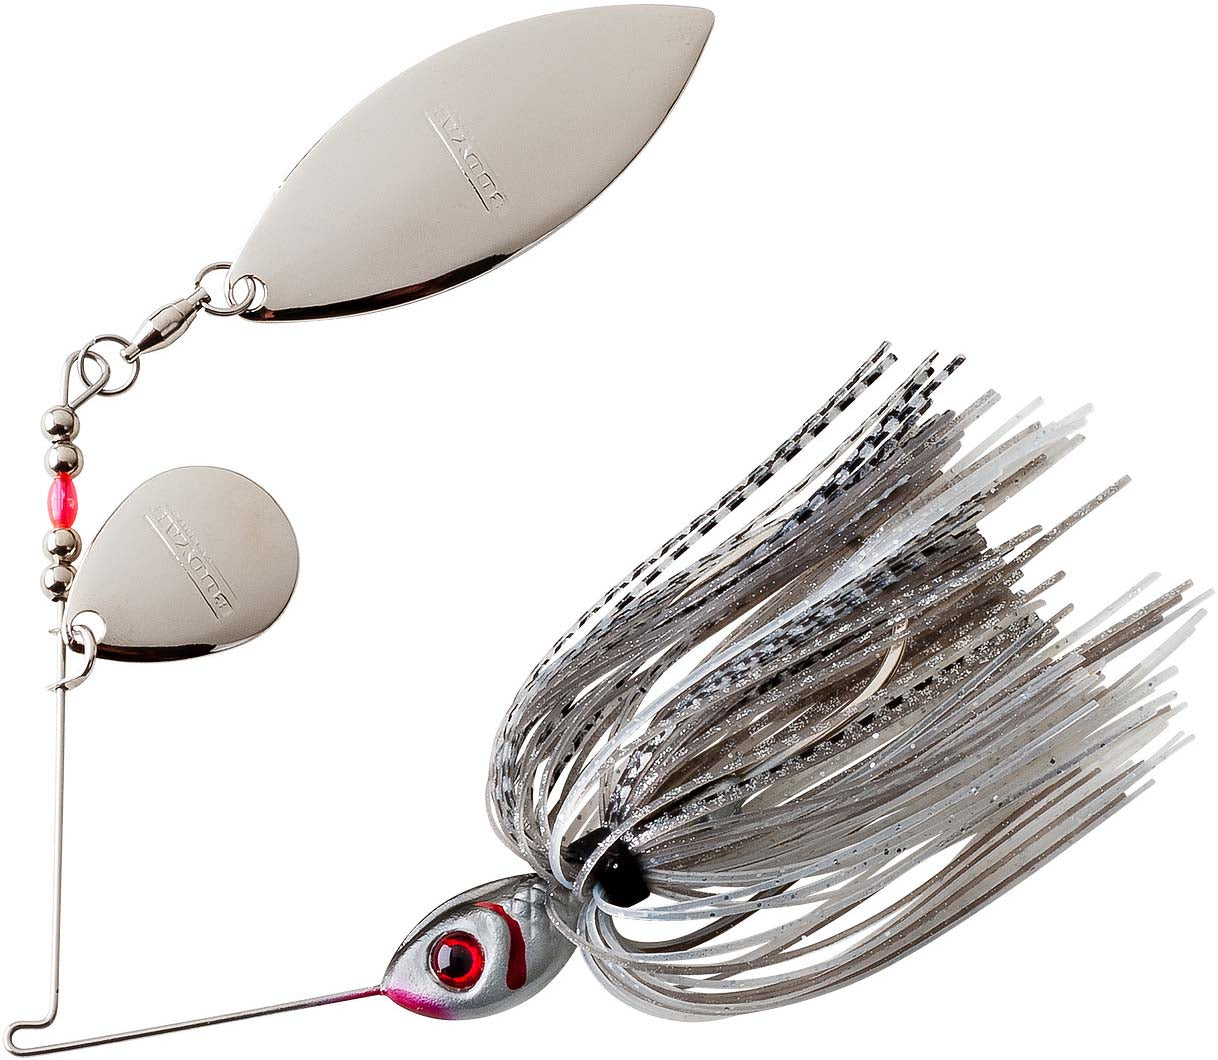 Booyah Pikee Spinner-Bait Fishing Lure for Pike and Musky, 1/2 Ounce